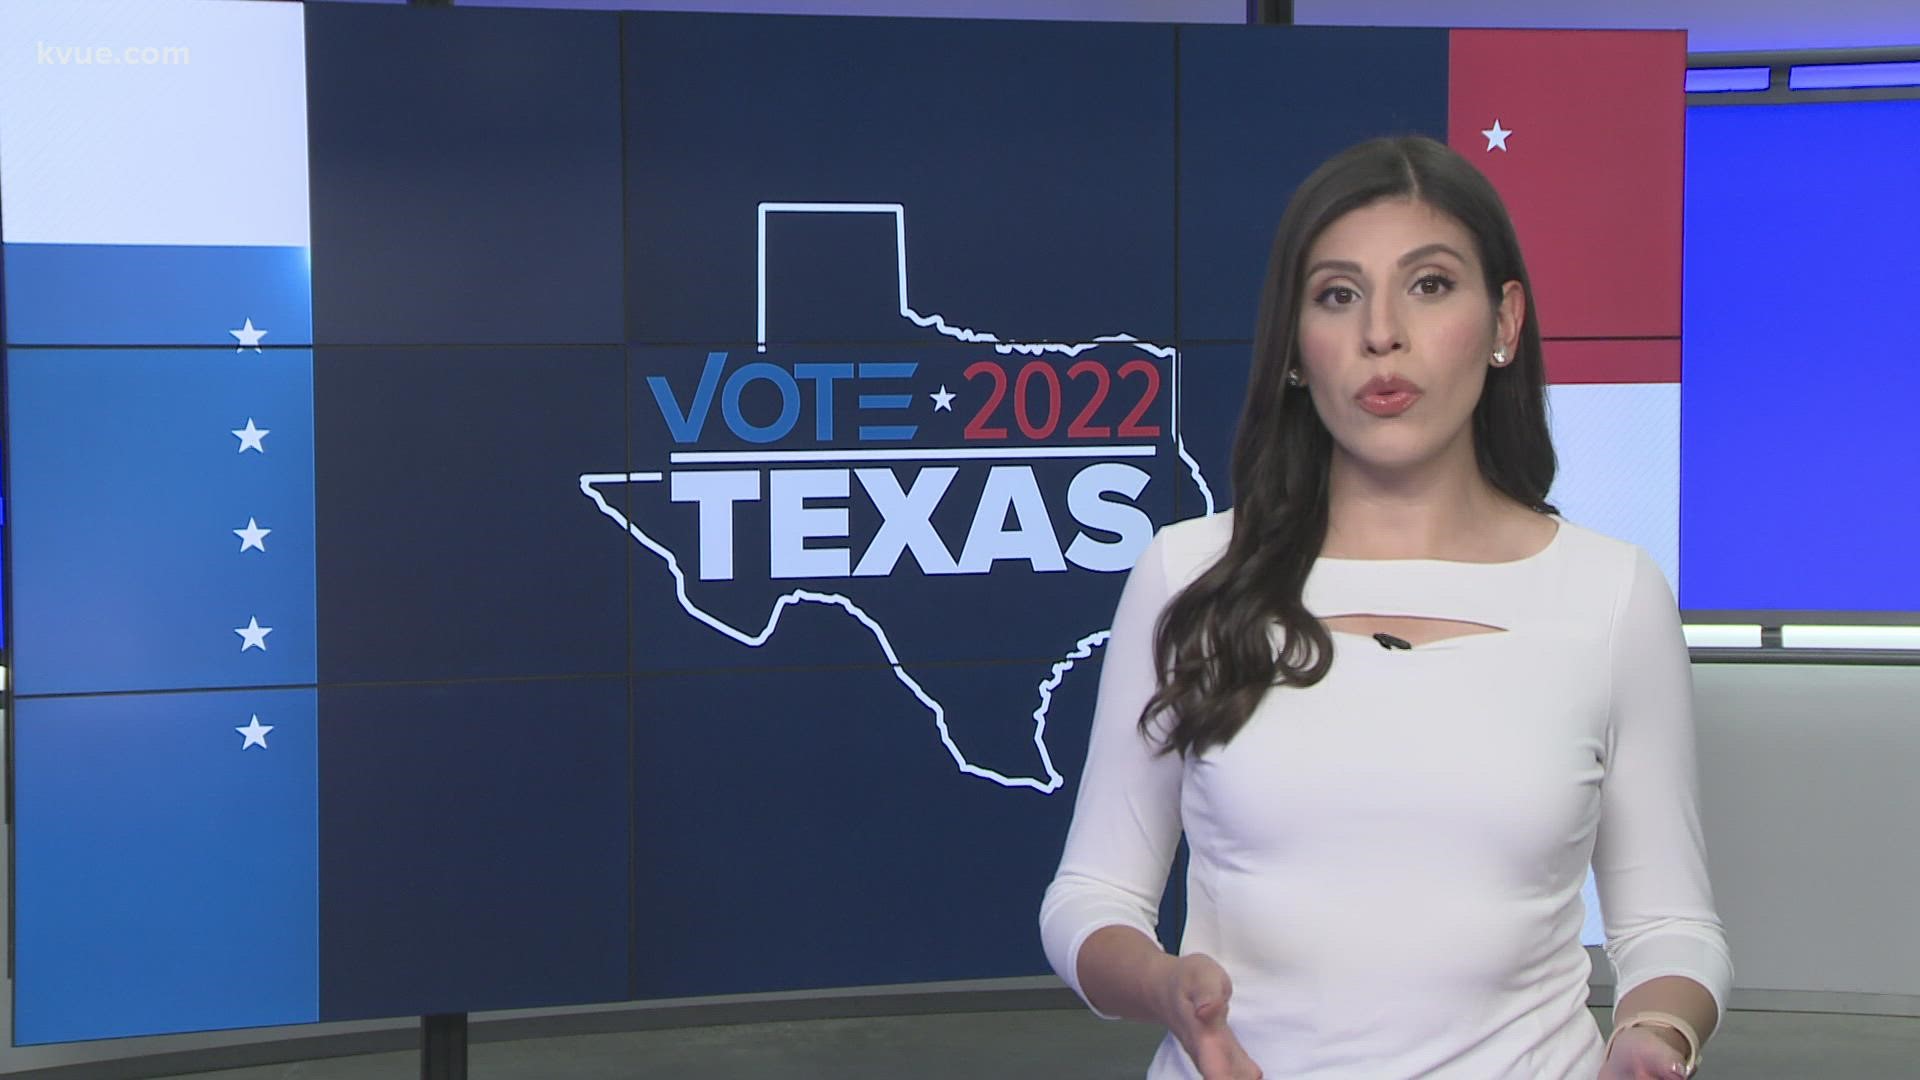 The Texas Primary Runoff Election is Tuesday, May 24.